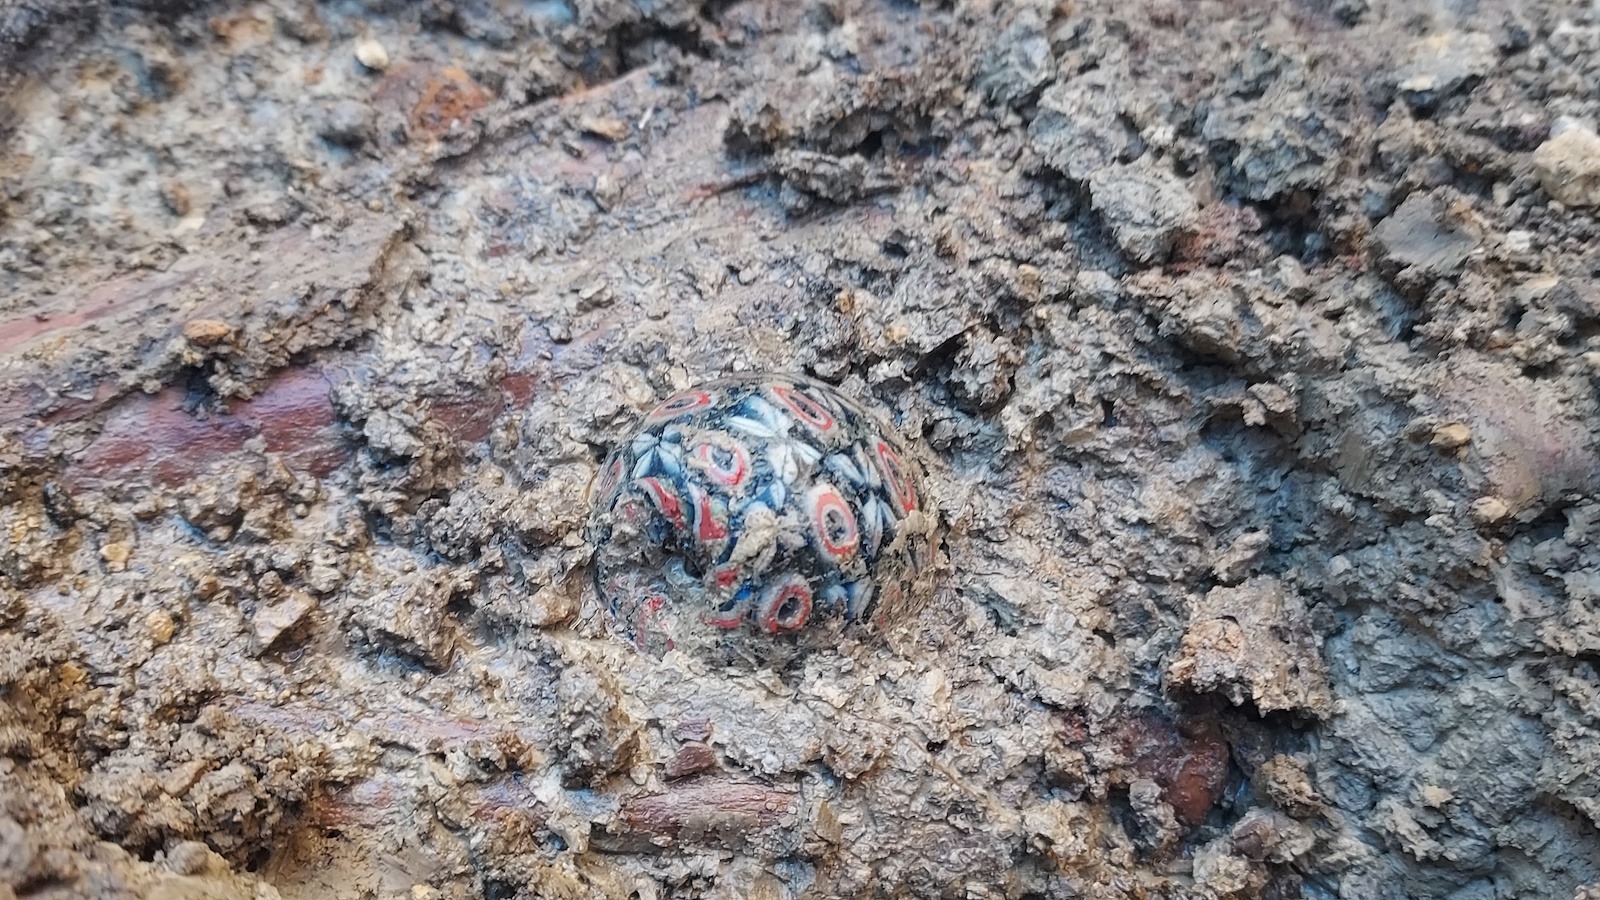 A large millefiori glass bead speckled with different colors of glass that were fused together found at the burial site.